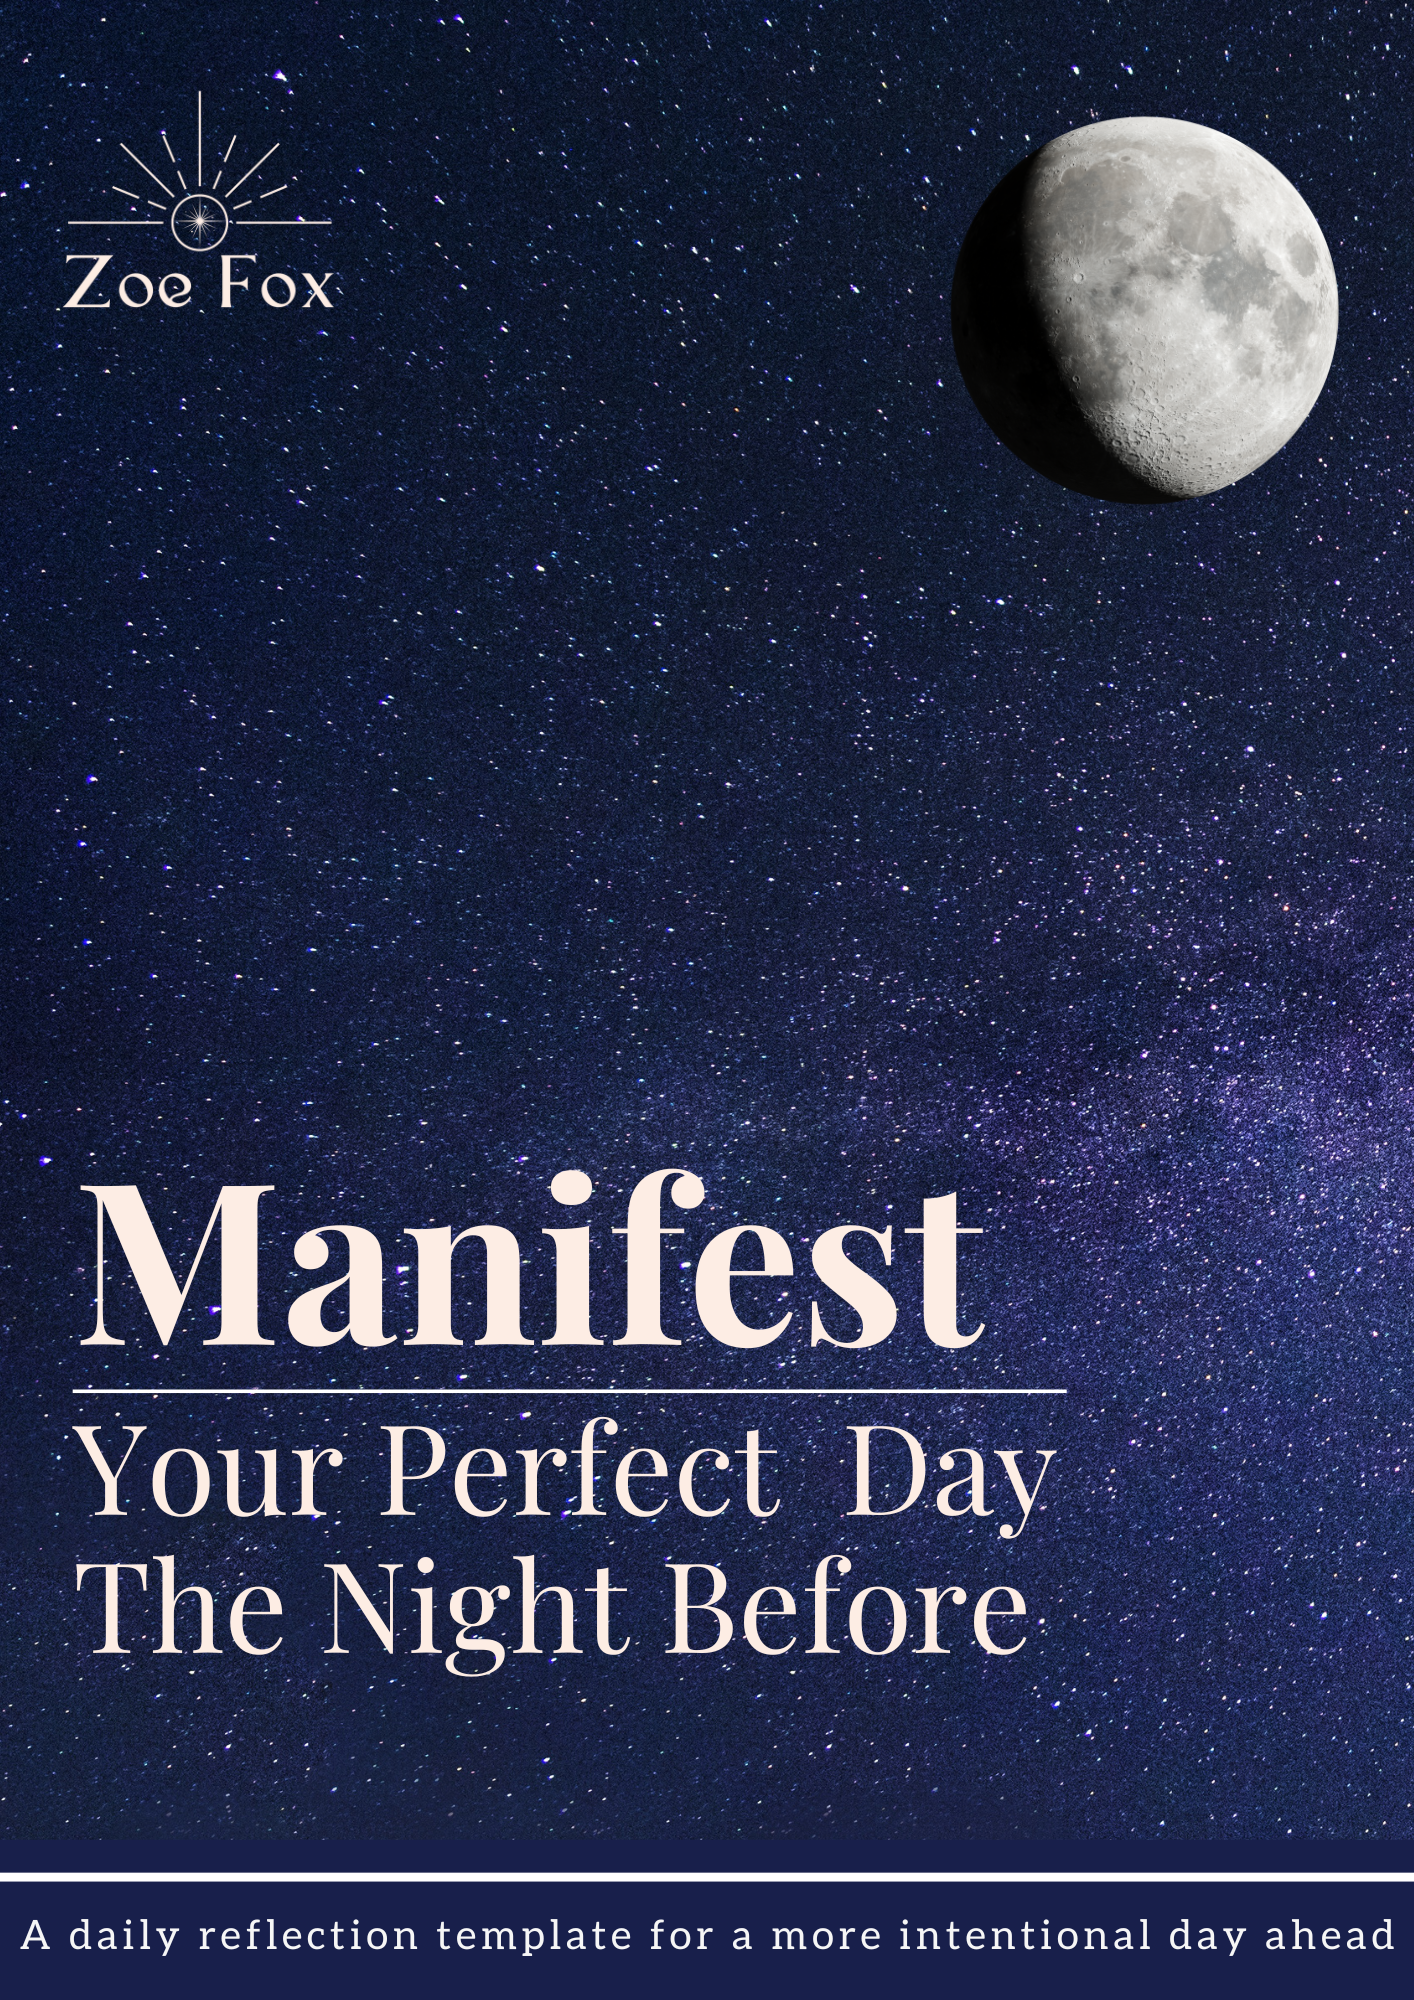 Manifest your perfect day planner.